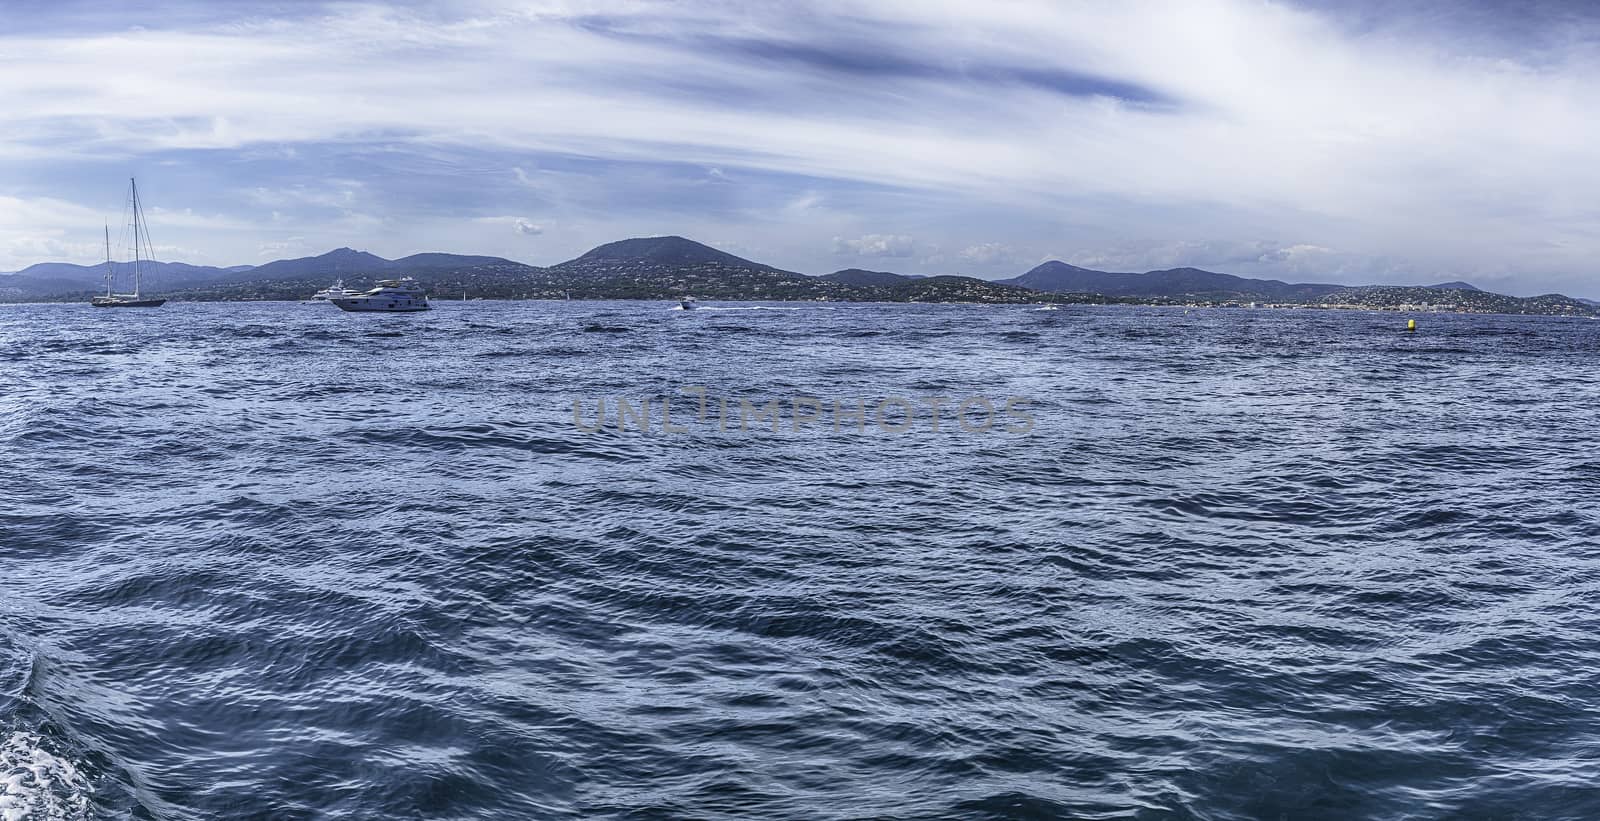 View of the old harbor of Saint-Tropez, Cote d'Azur, France by marcorubino